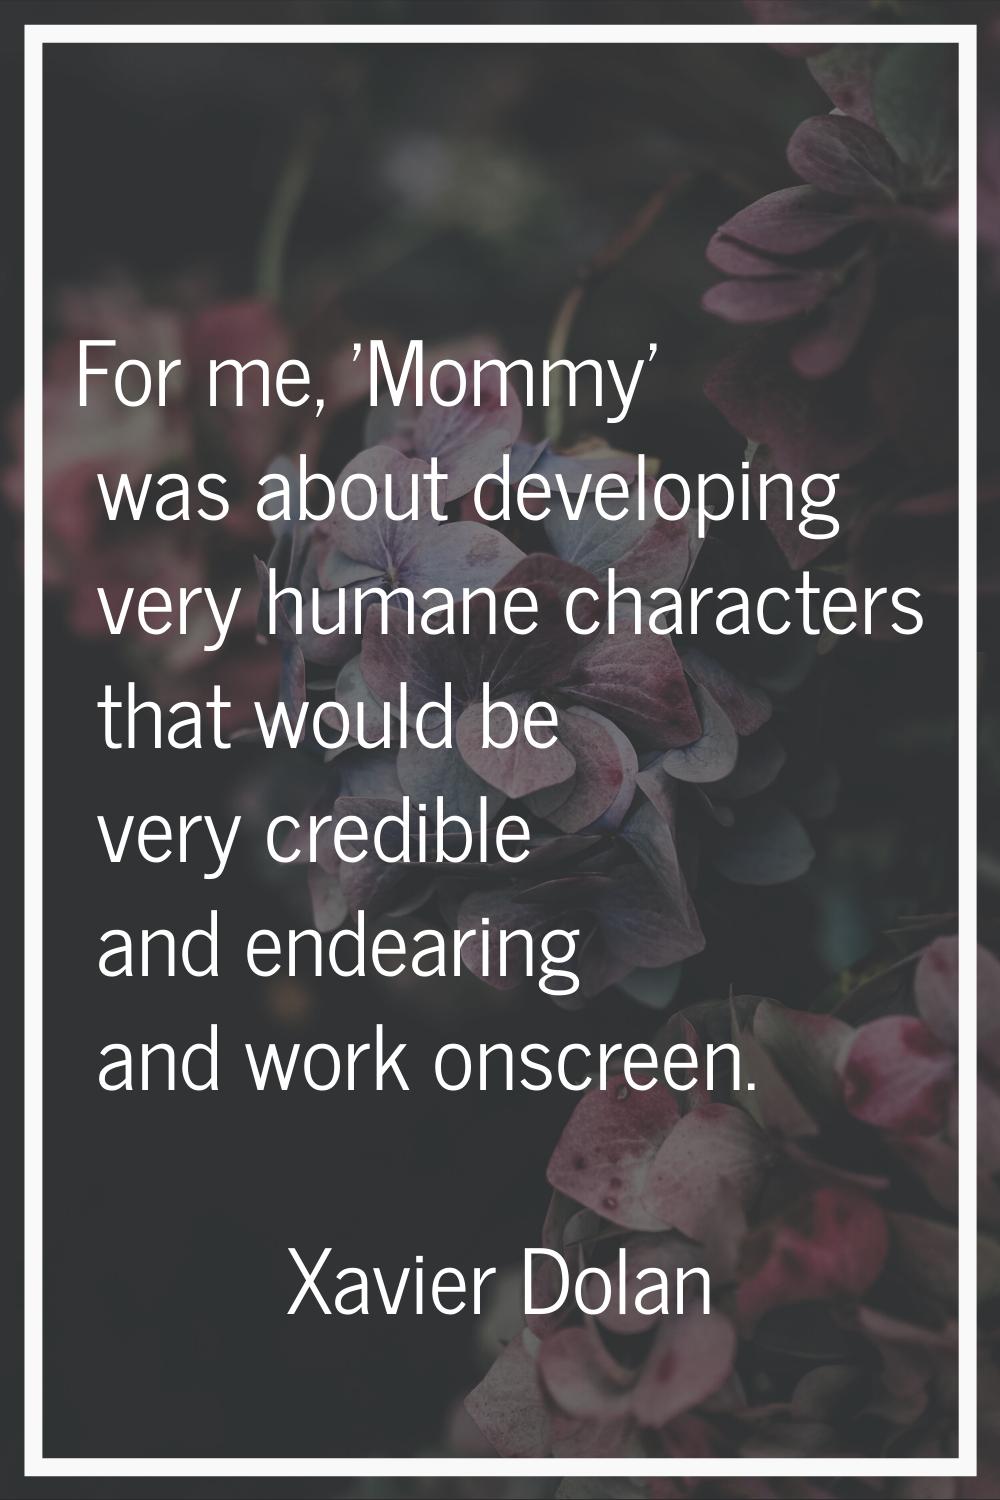 For me, 'Mommy' was about developing very humane characters that would be very credible and endeari